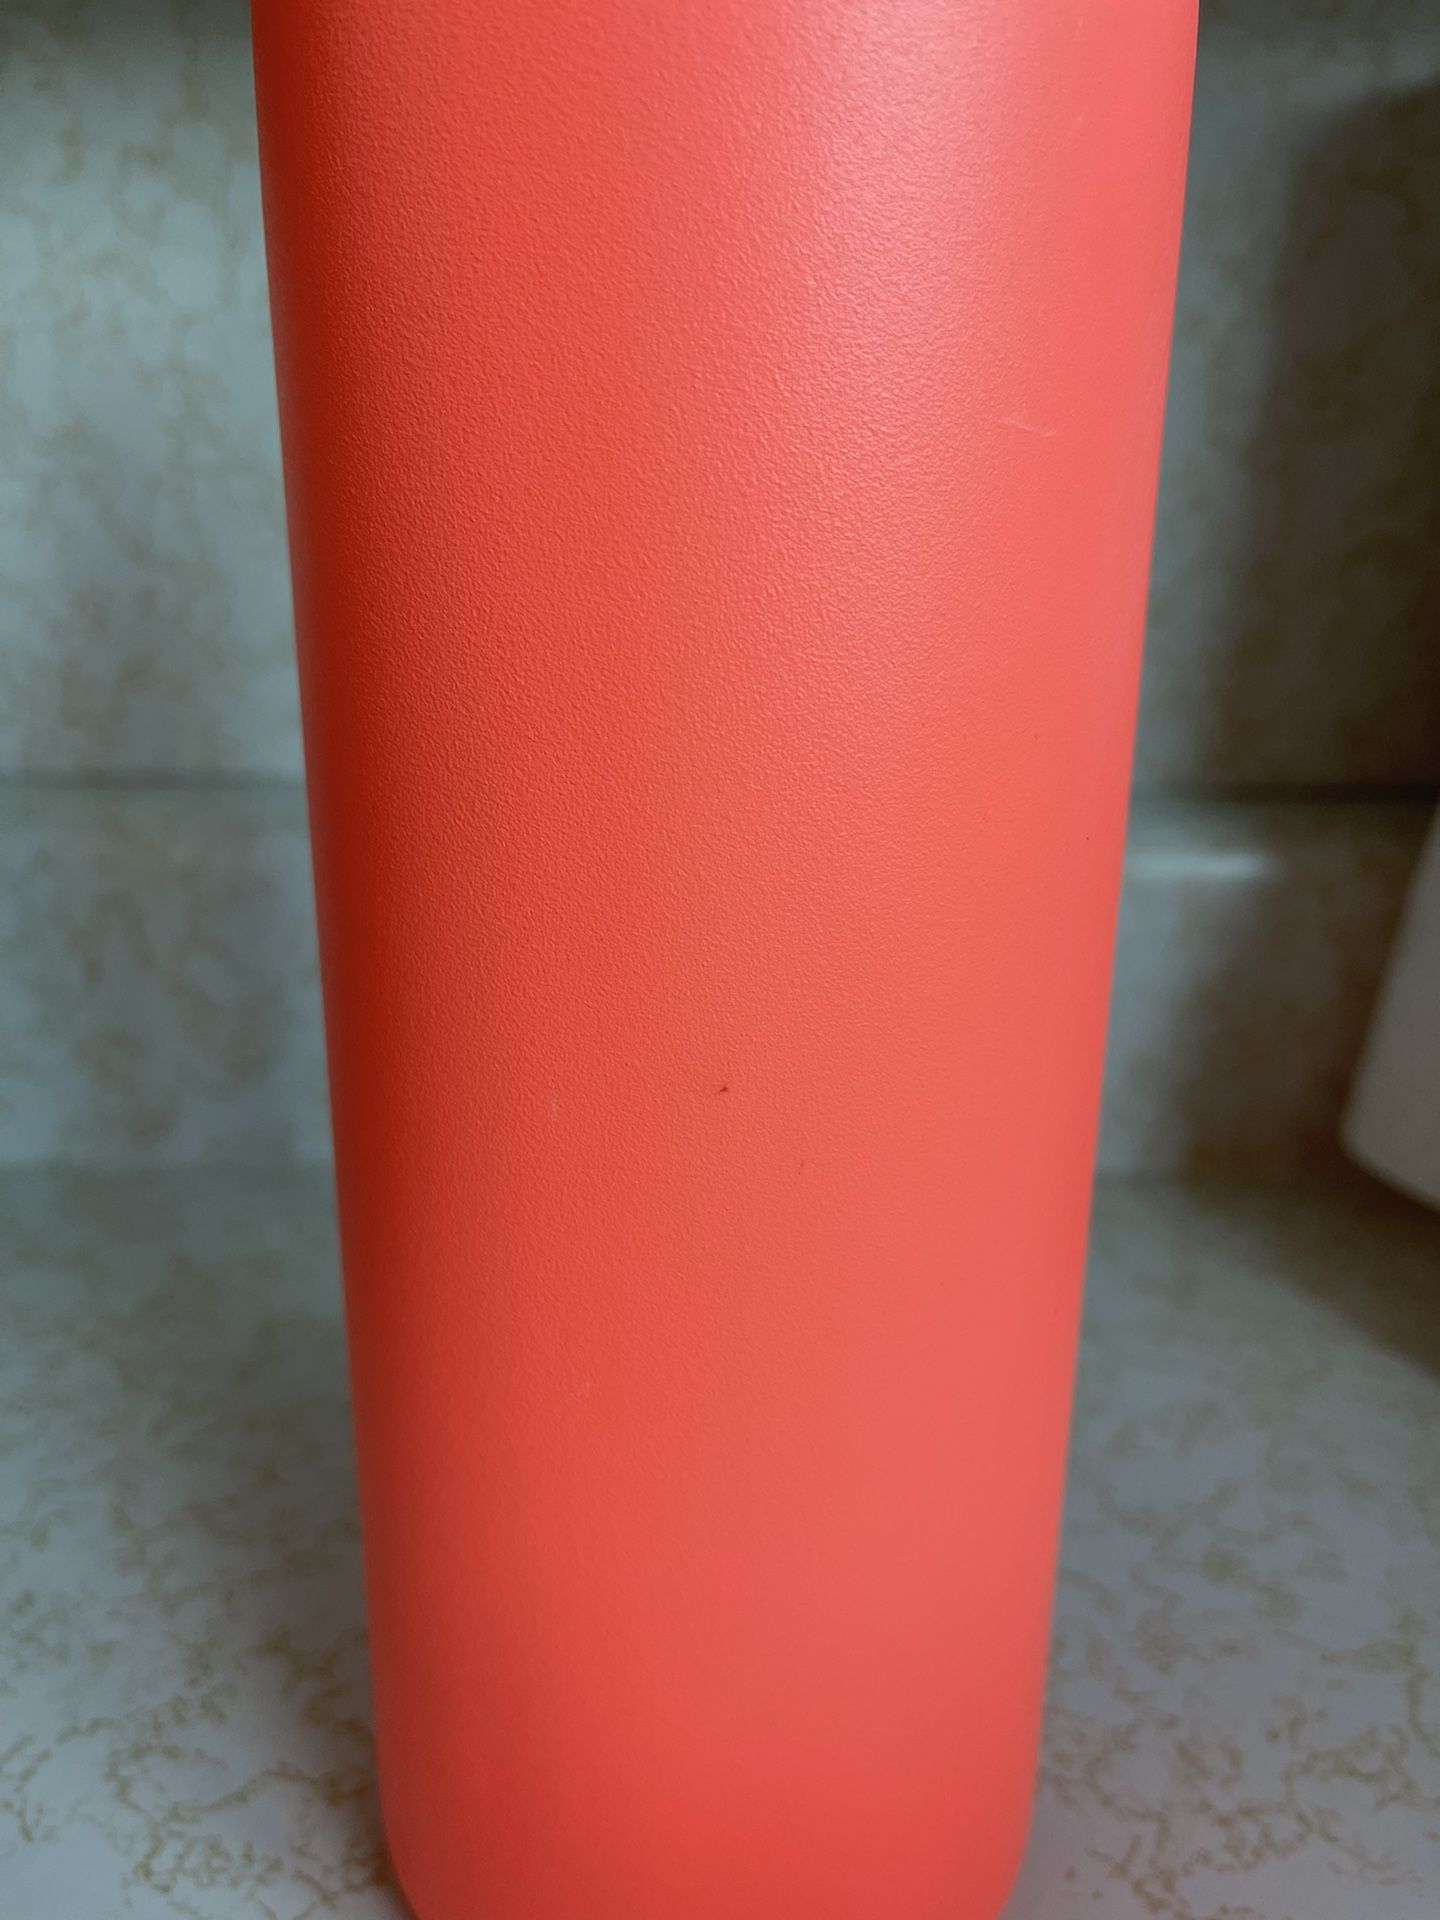 Hydraflow 40oz Stainless Steel Tumbler With Handle for Sale in North  Bergen, NJ - OfferUp